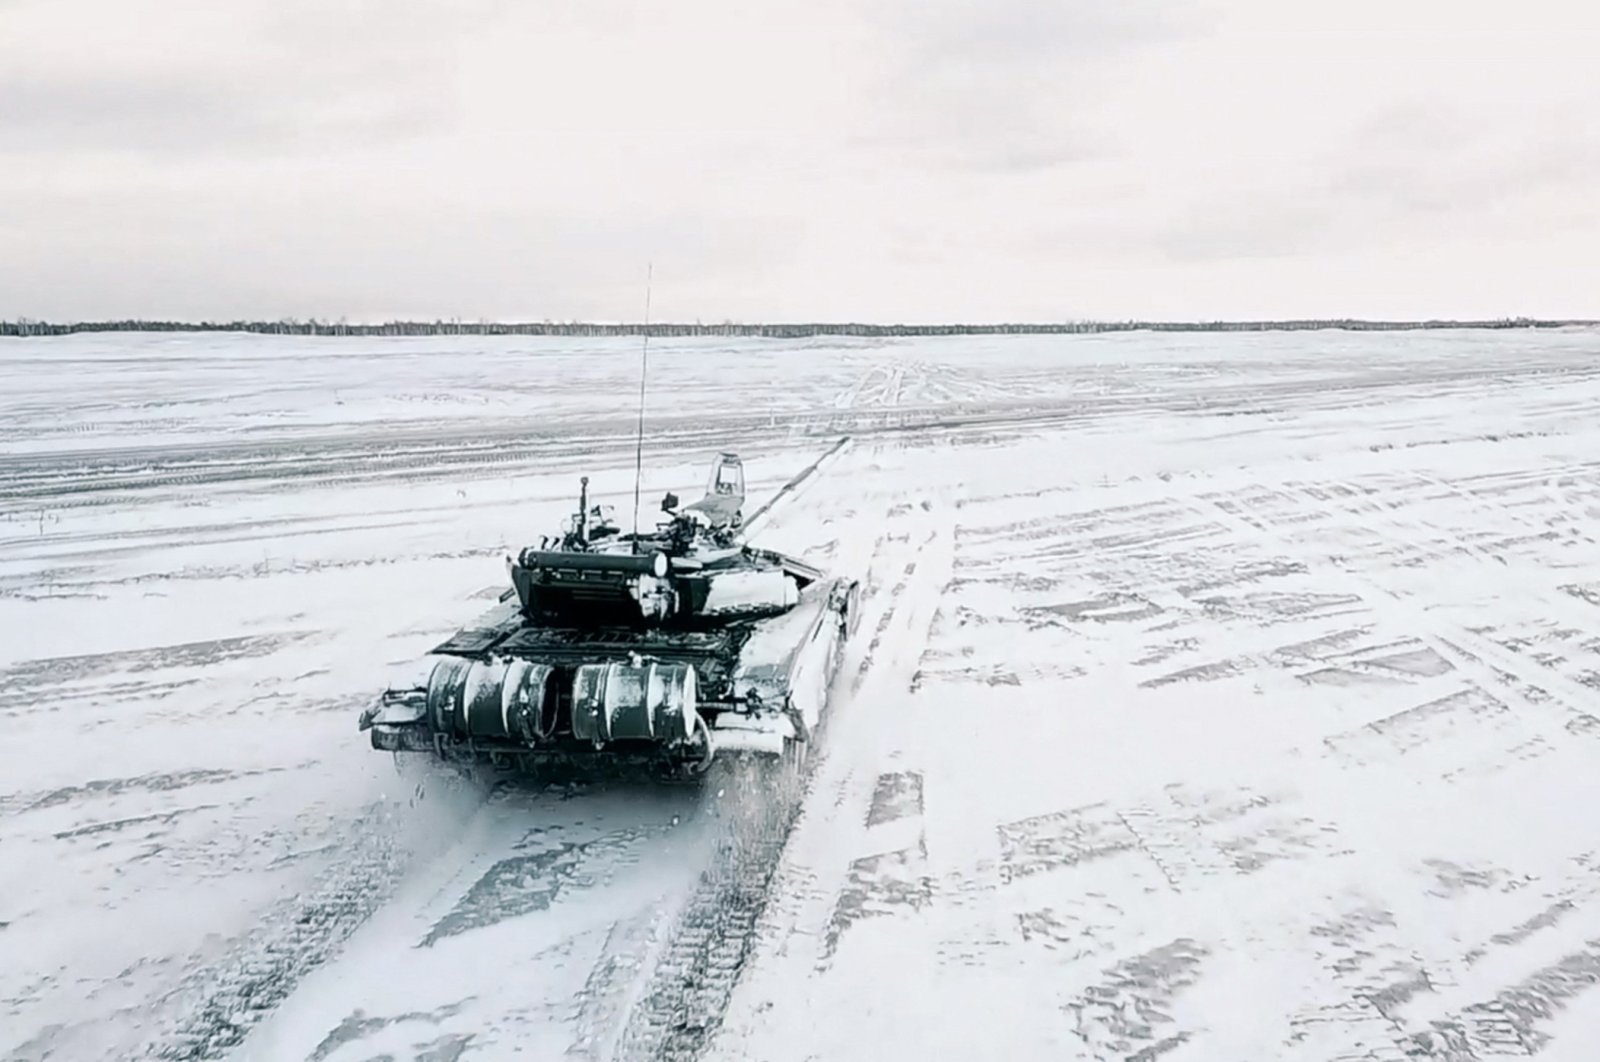 This handout video grab taken and released by the Russian Defense Ministry shows a tank on a snow-covered field during joint exercises of the armed forces of Russia and Belarus as part of an inspection at Brestsky firing range in Belarus, Feb. 2, 2022. (AFP Photo/Russian Defense Ministry)